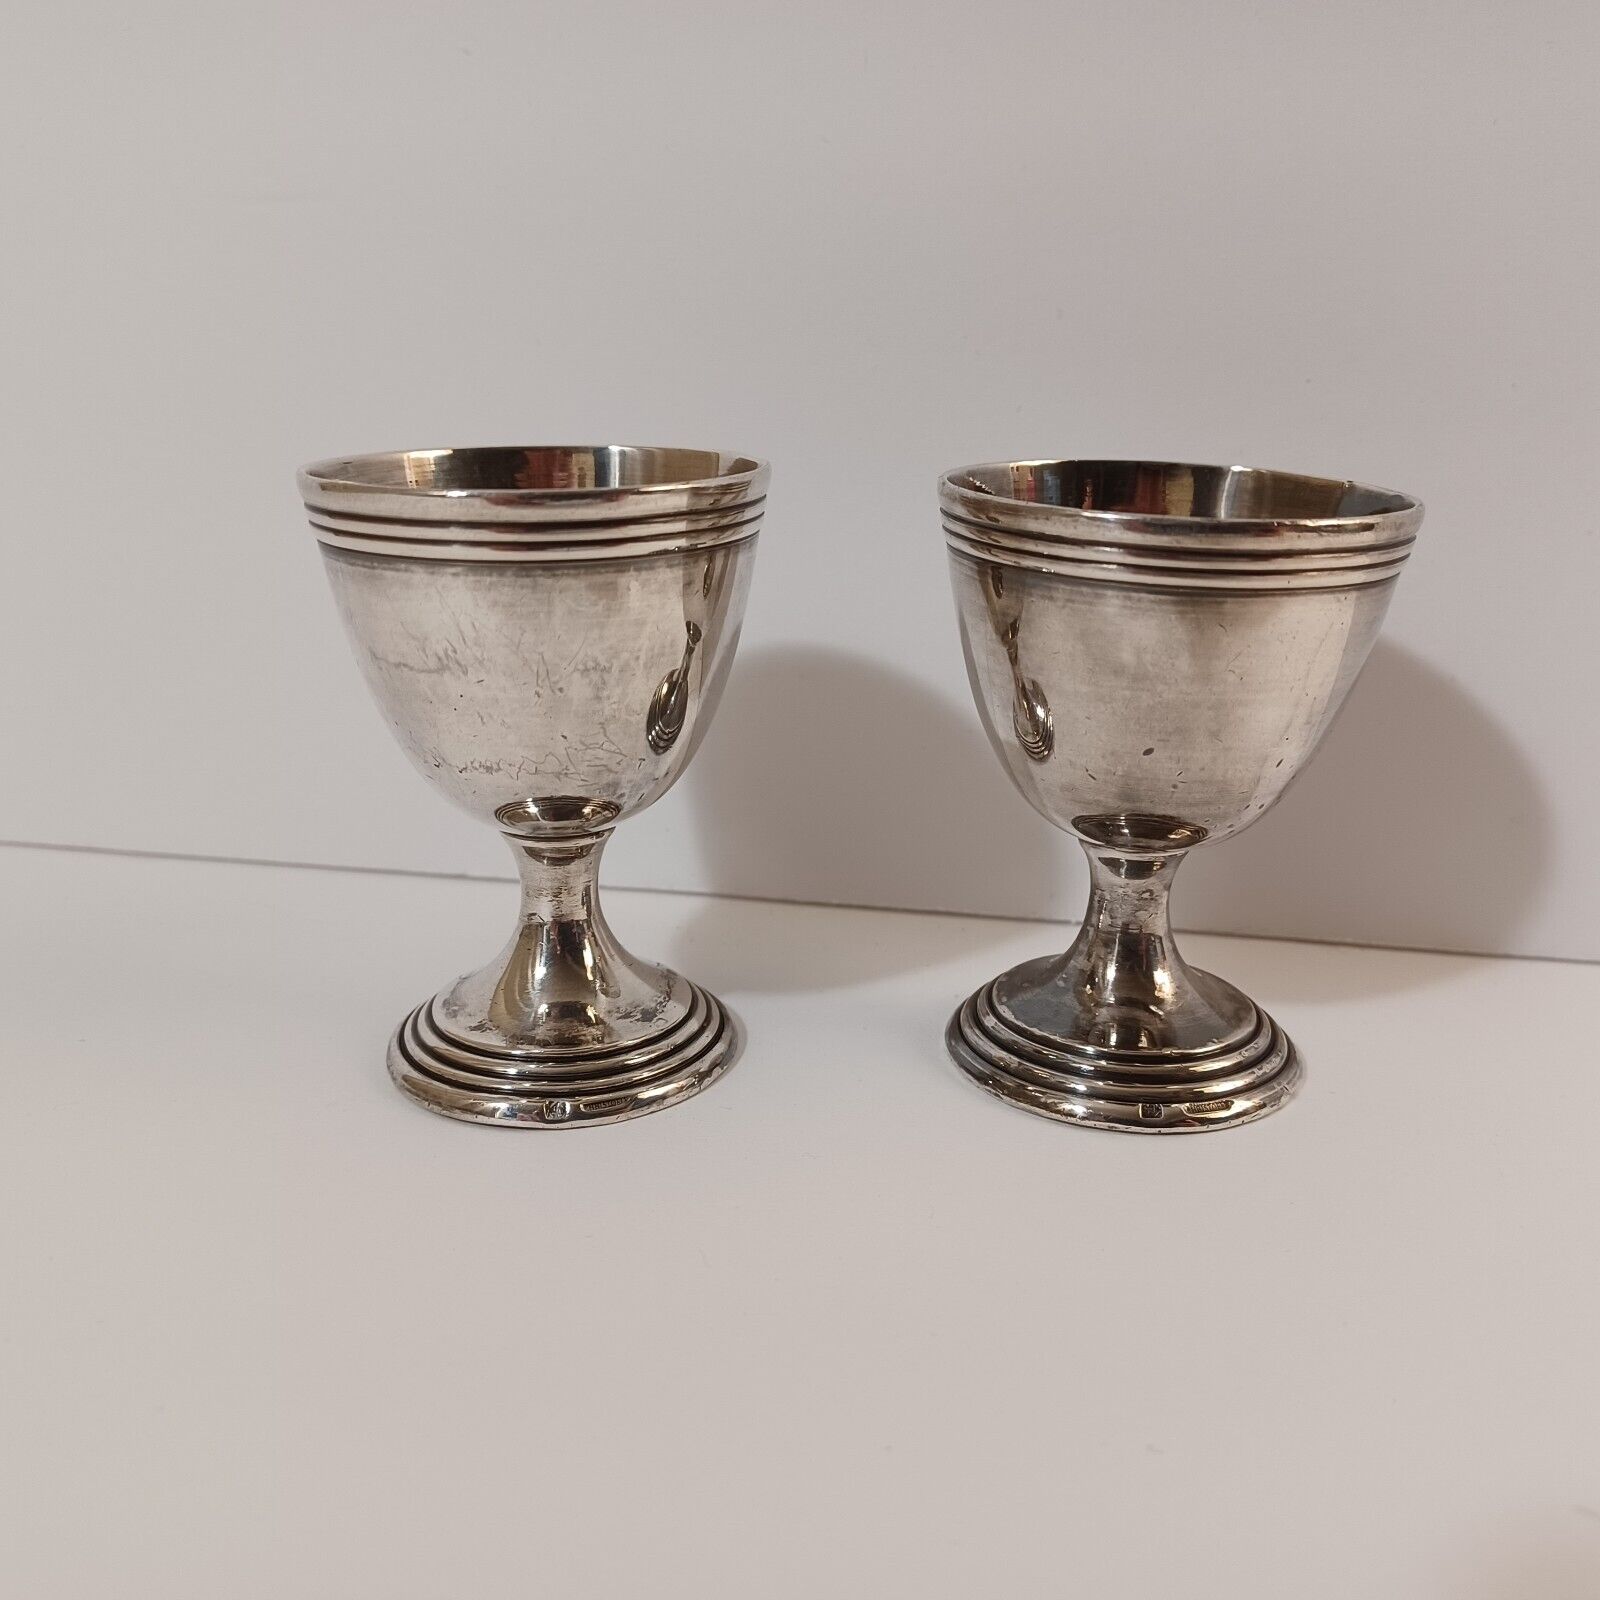 Christofle Silverplate Egg Cups Or Cordial Glasses Embossed \